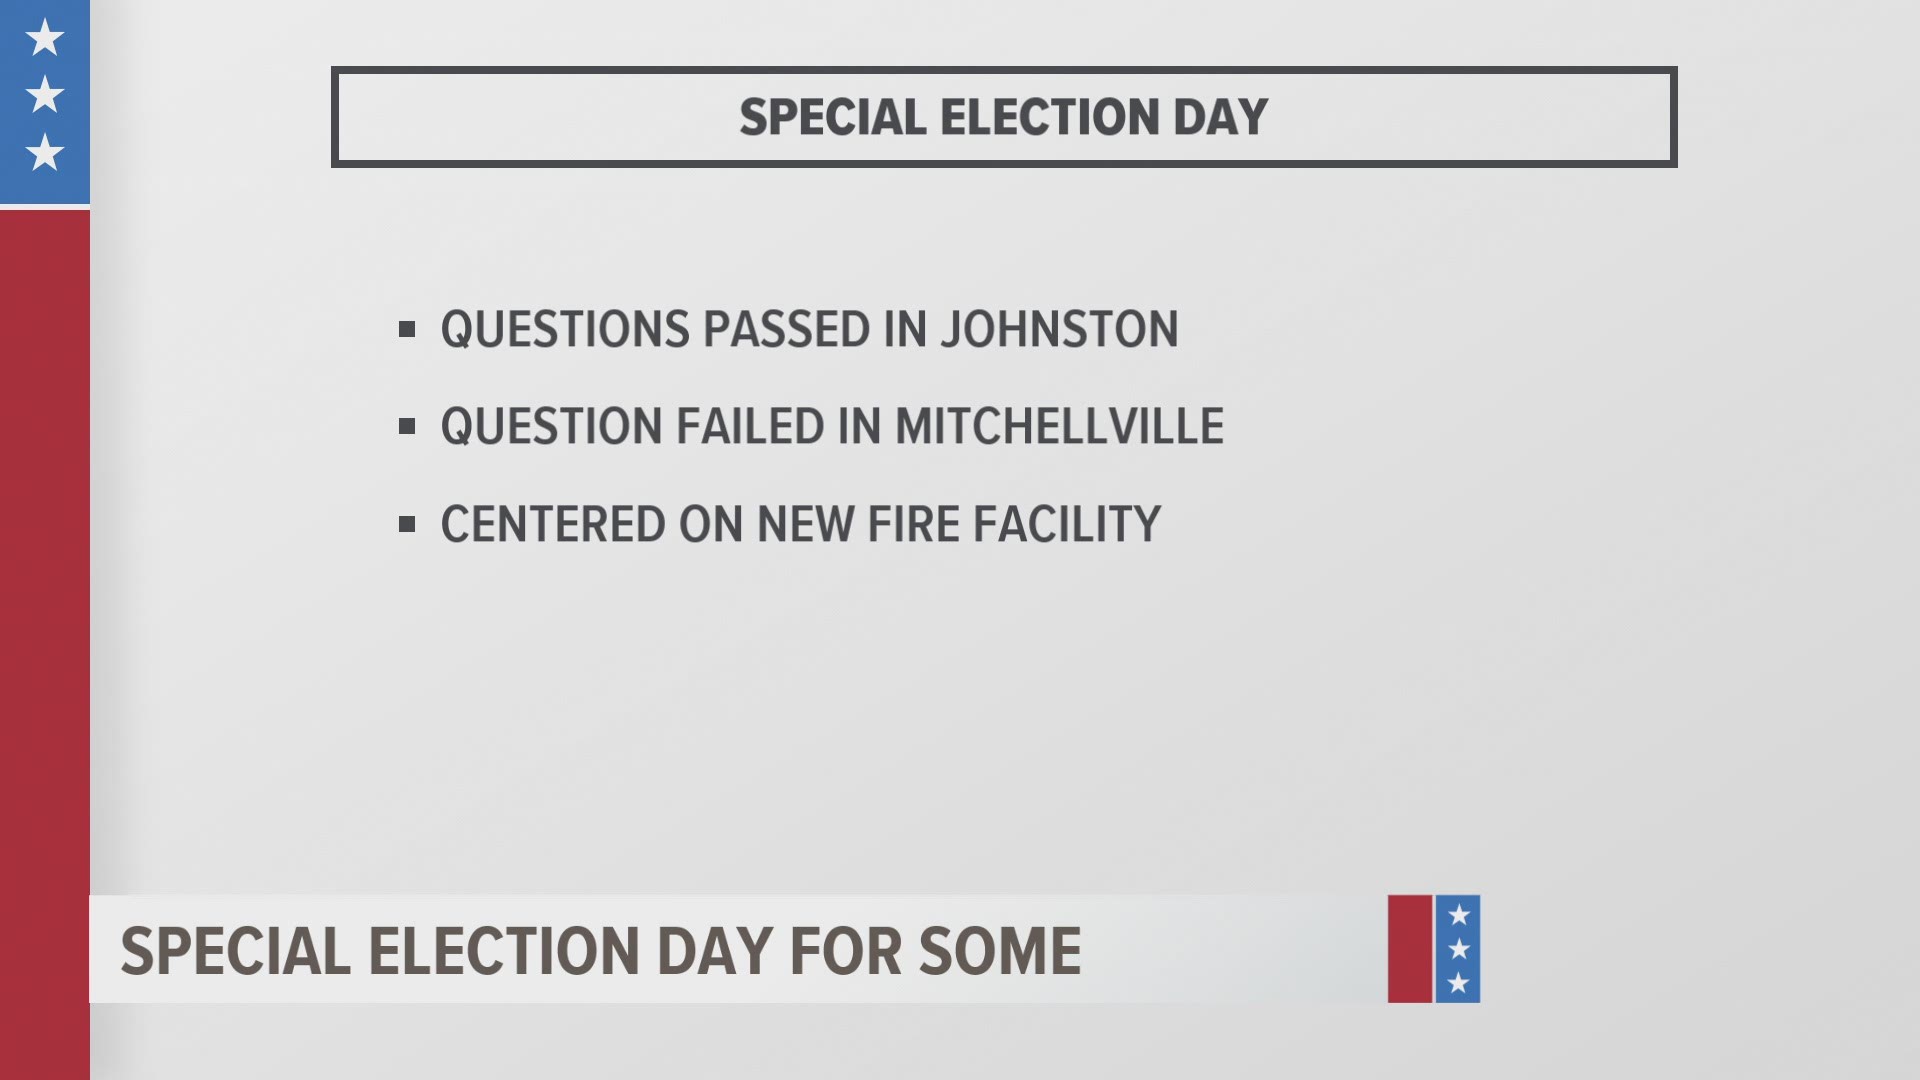 Special elections were held across central Iowa on Tuesday.